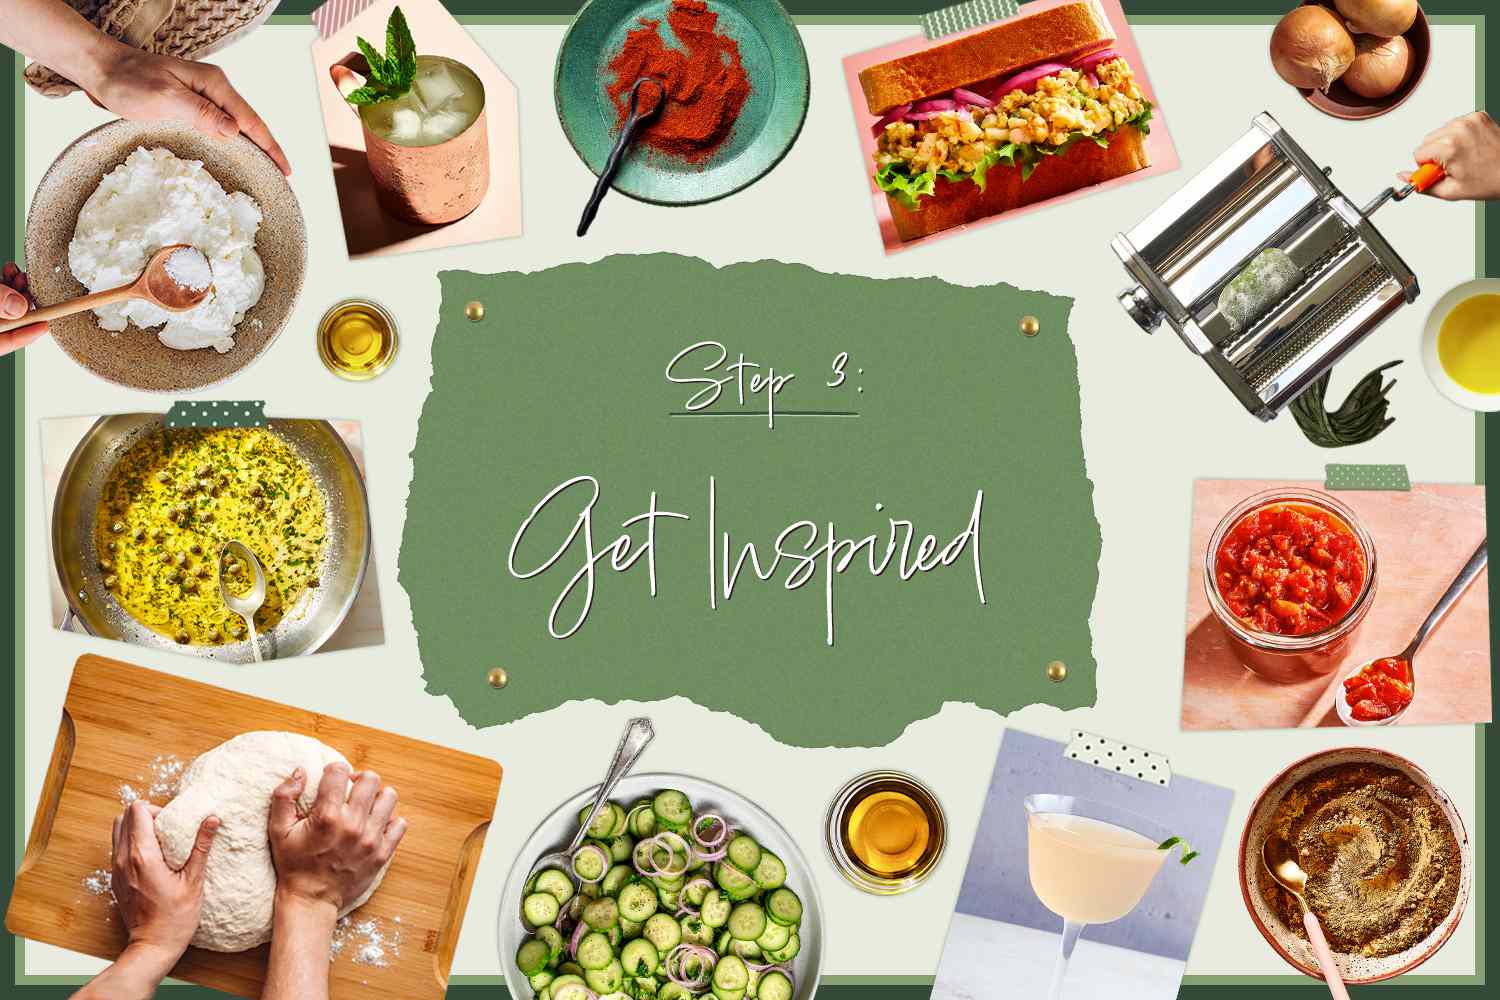 A collage of inspirational images with text that says "step 3: get inspired" in the center